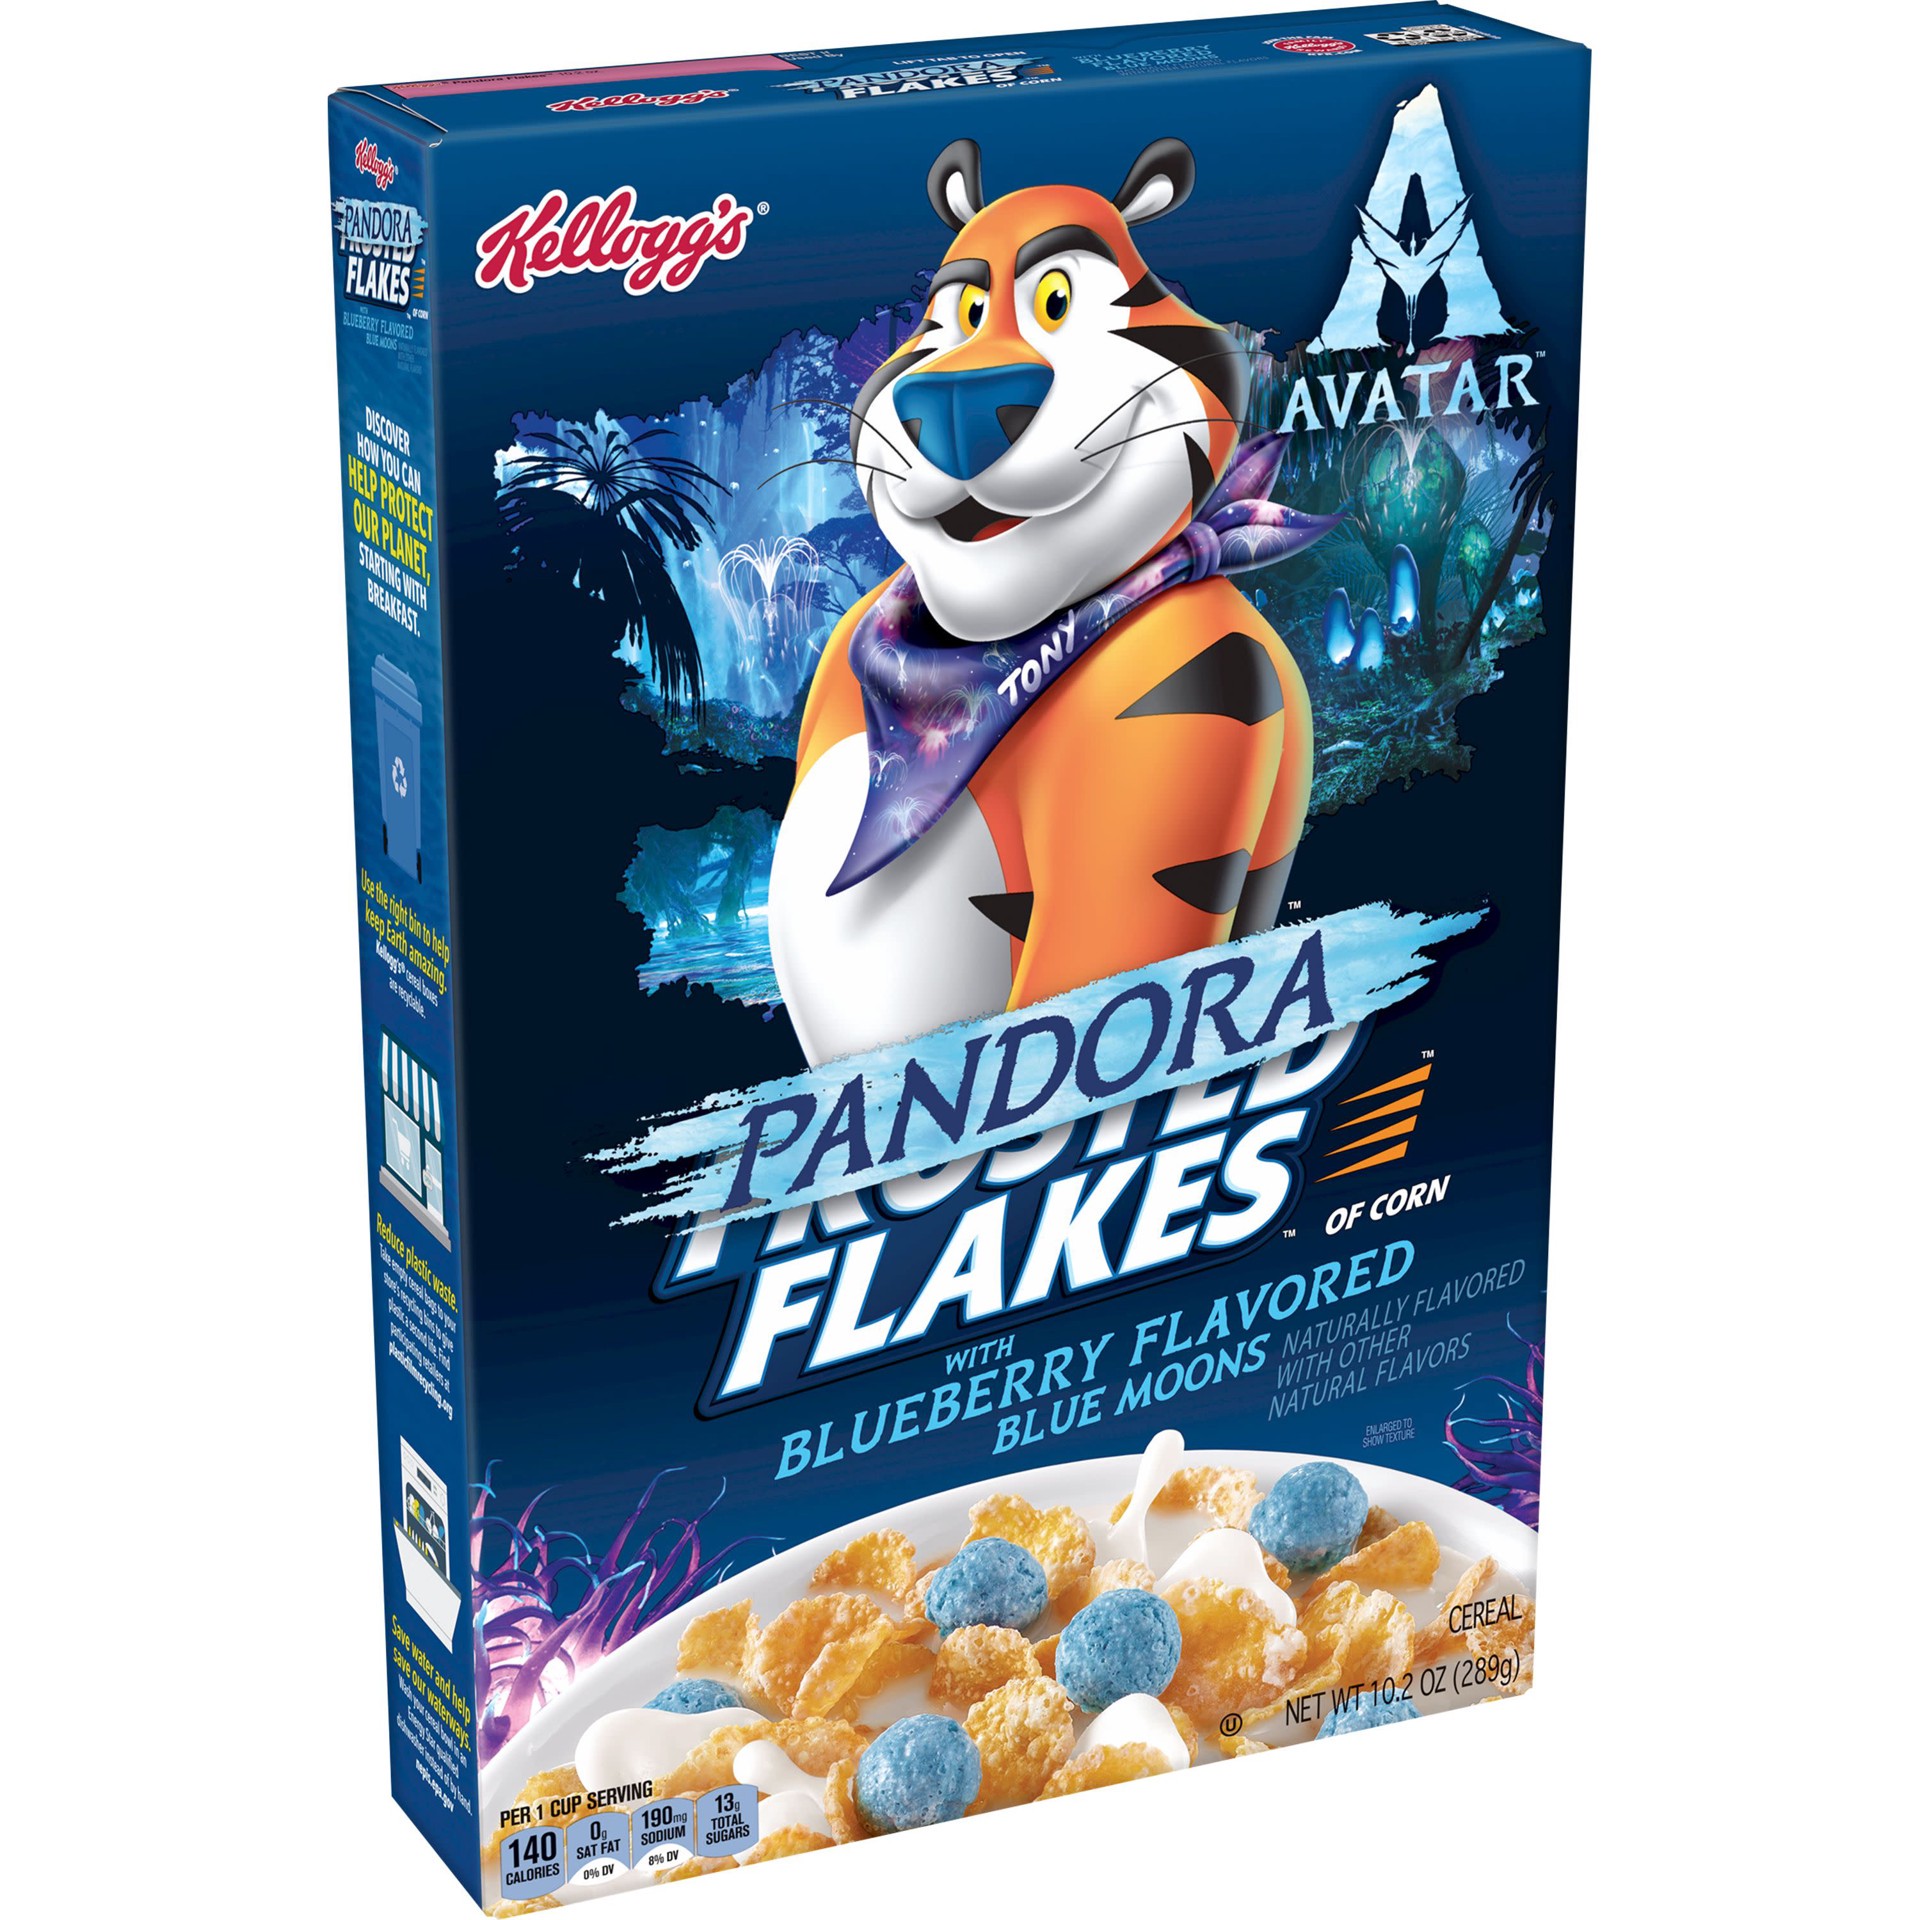 slide 1 of 10, Frosted Flakes Kellogg's Frosted Flakes Avatar Breakfast Cereal, Pandora Cereal, Kids Snacks, Original with Blueberry Flavored Blue Moons, 10.2oz, 1 Box, 10.2 oz